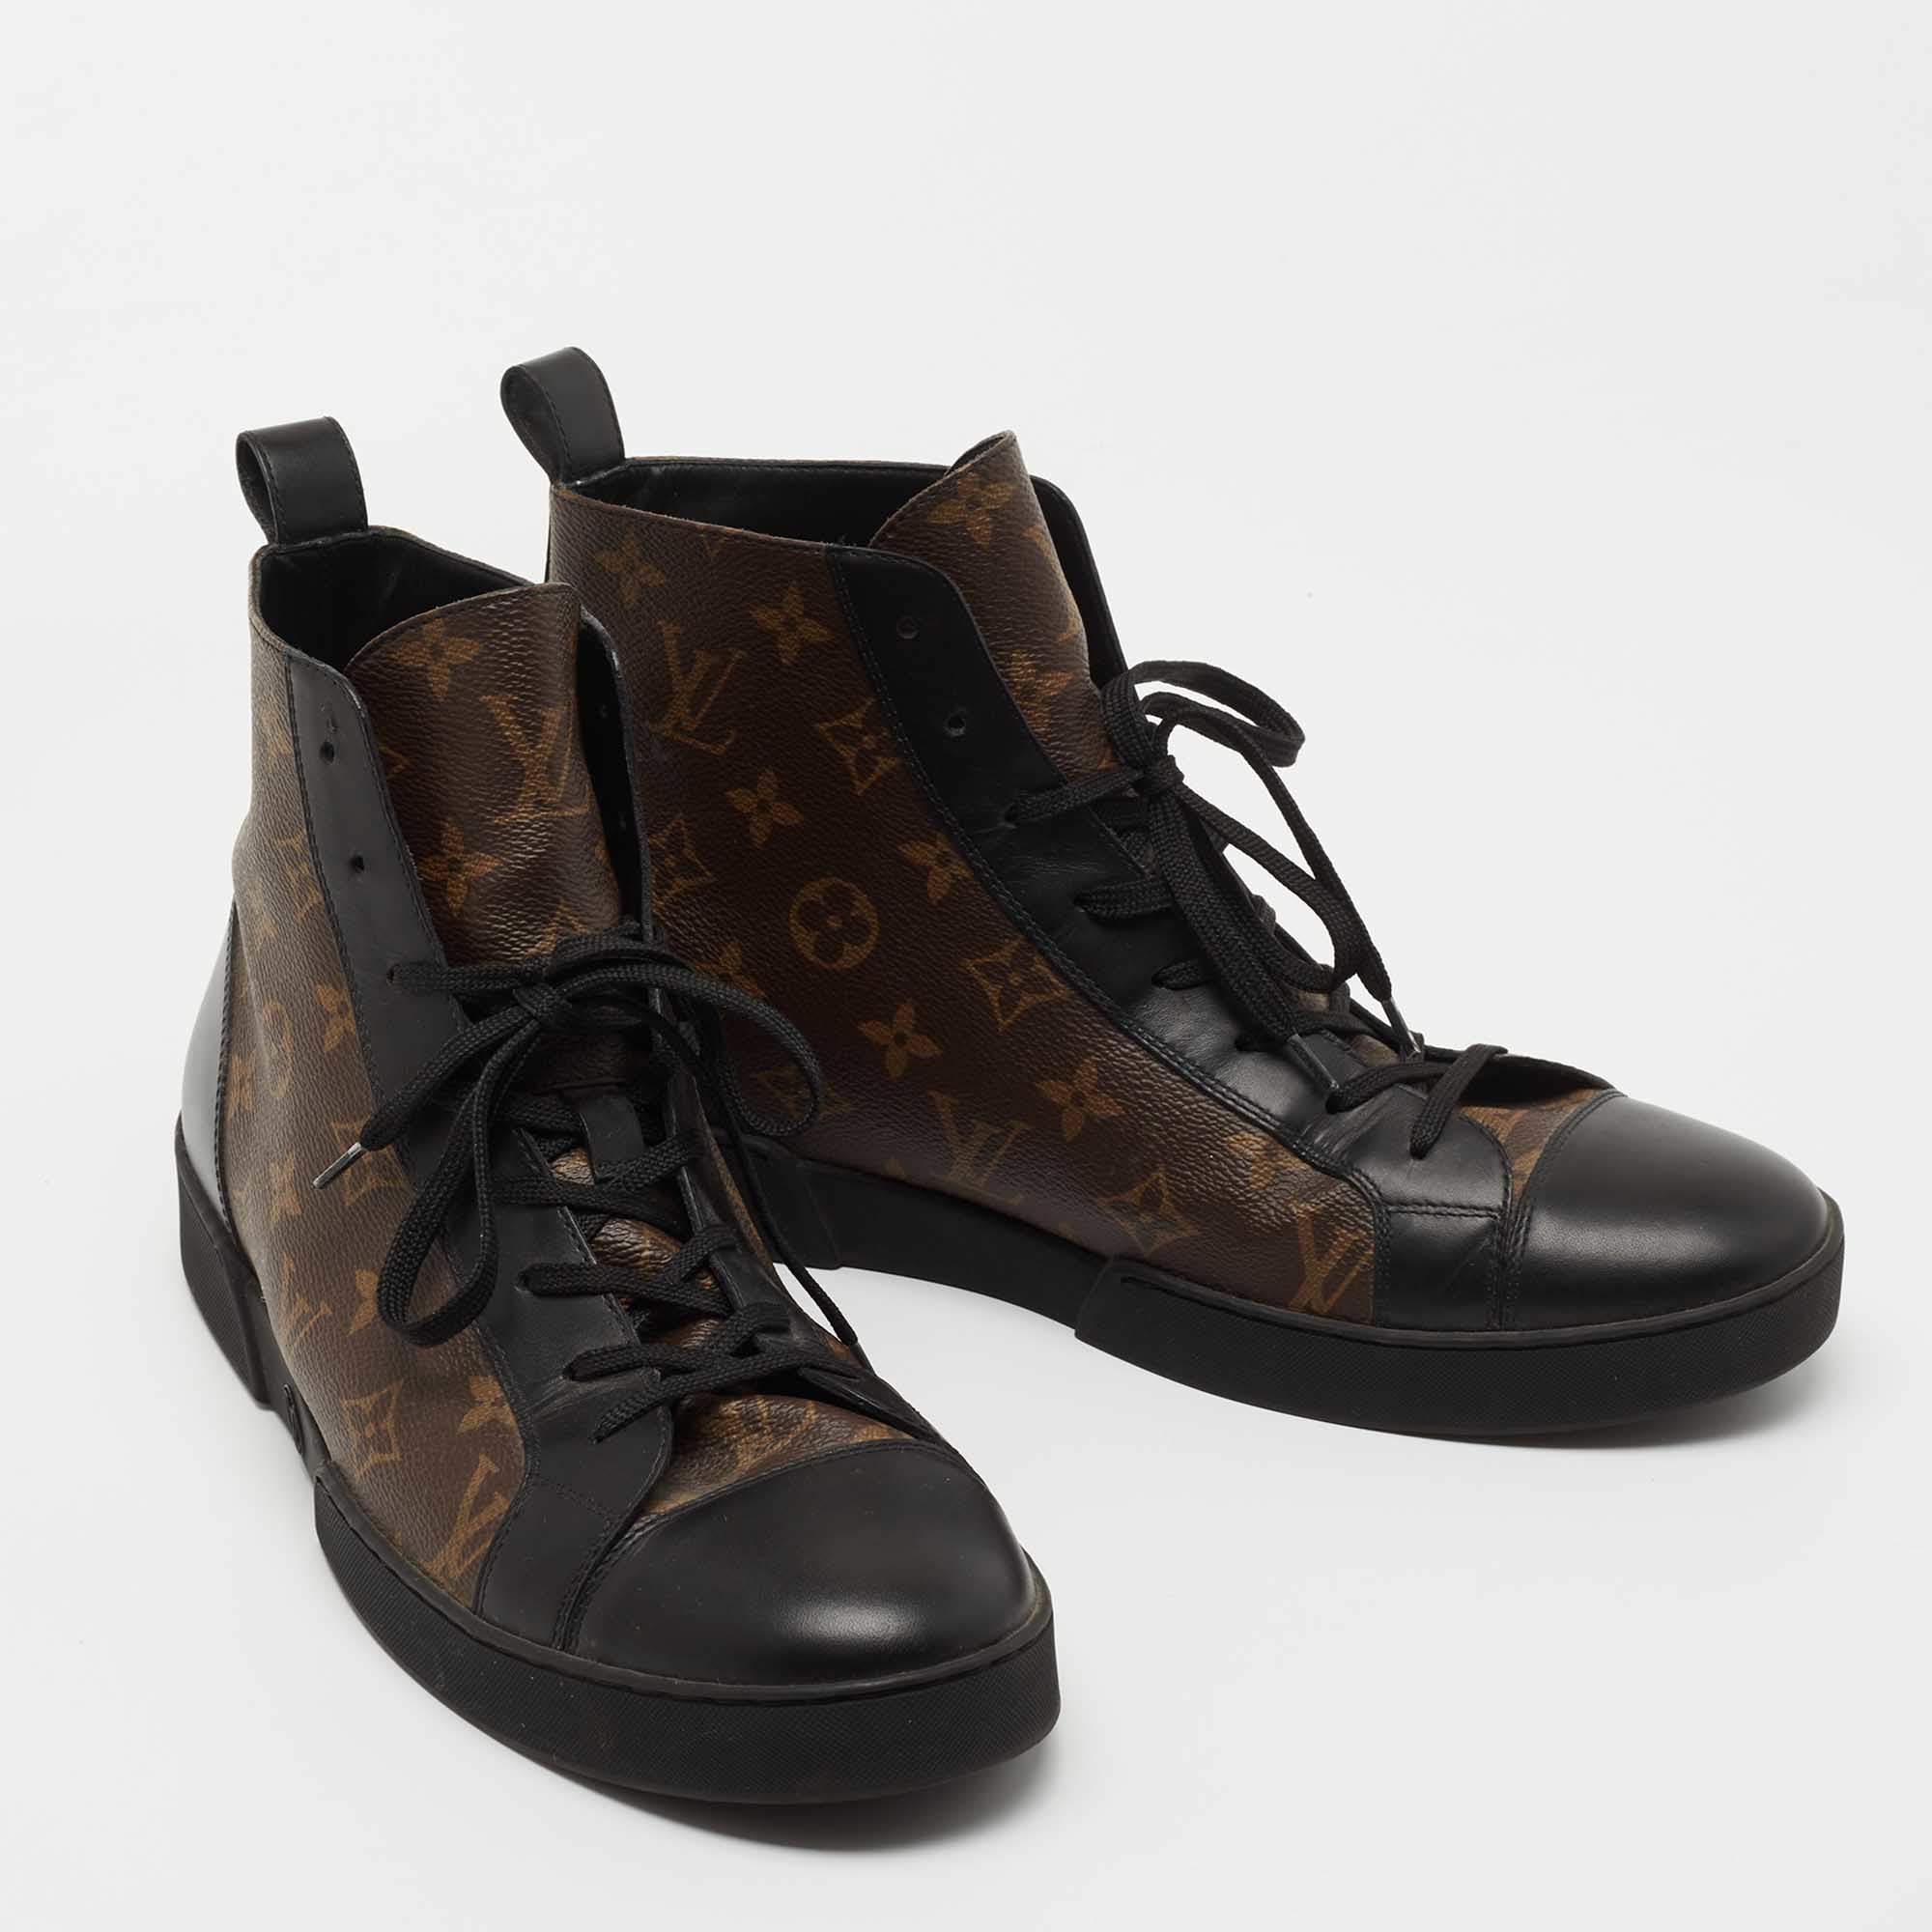 Louis Vuitton Brown/Black Monogram Canvas and Leather Match Up Sneakers  Size 42.5 Louis Vuitton